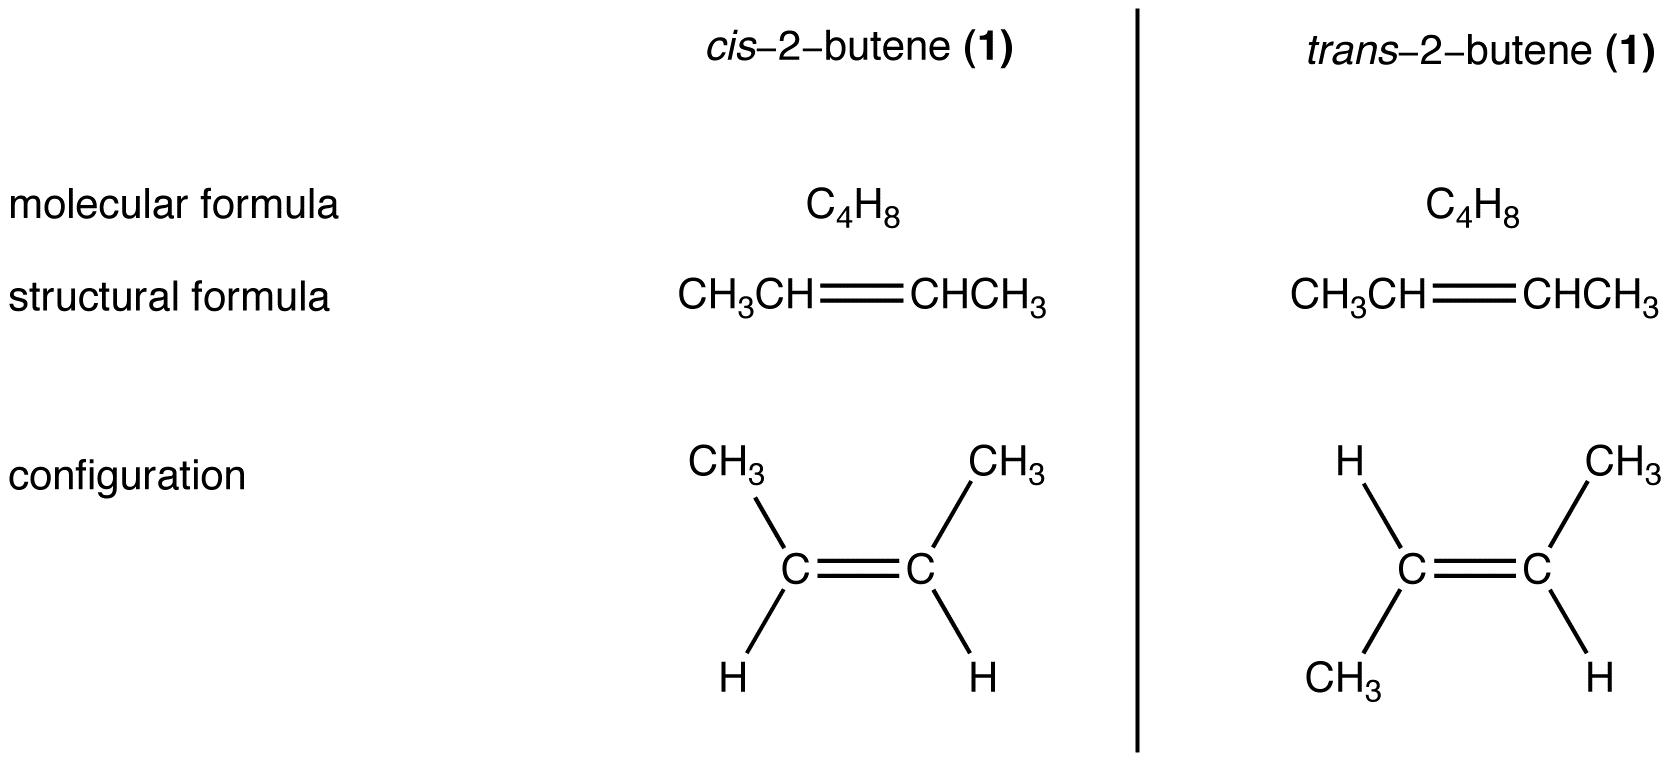 stereoisomers2.png